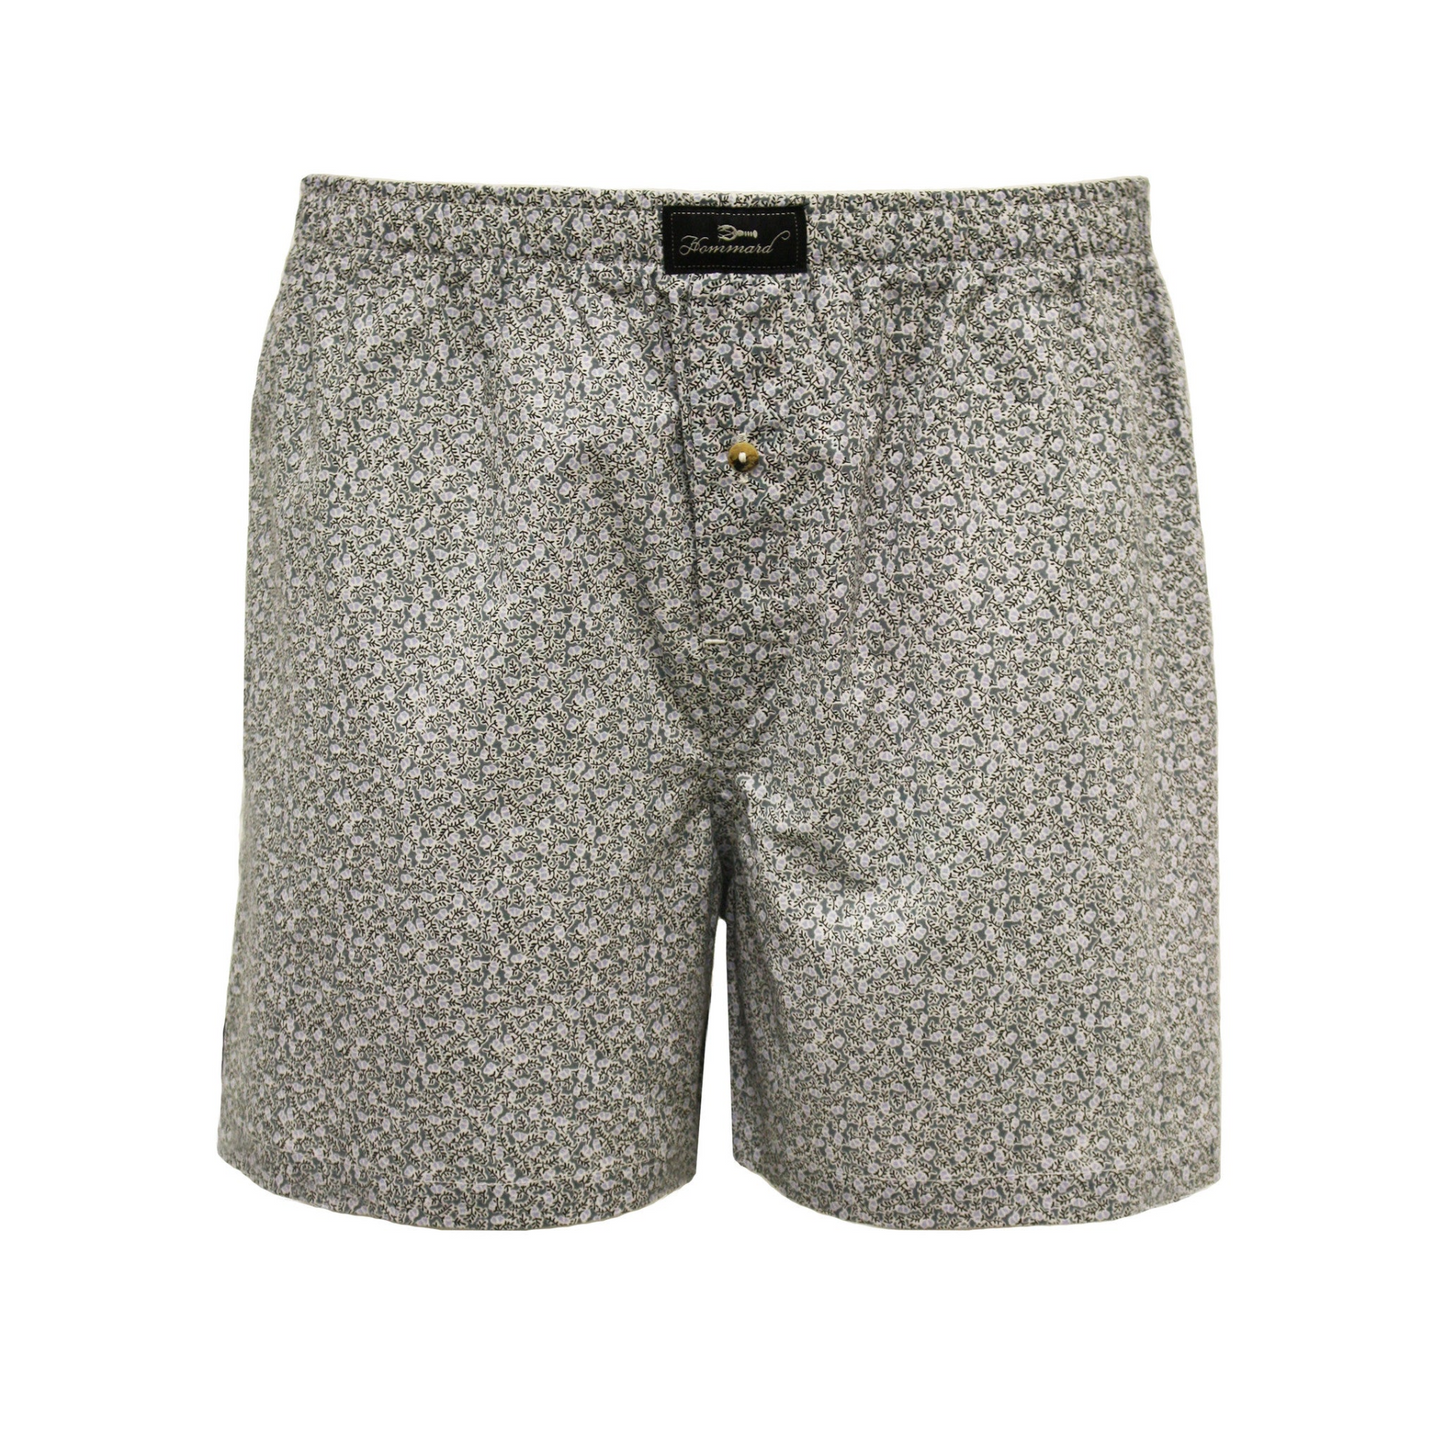 Woven Cotton Boxer Shorts Taupe Leaves